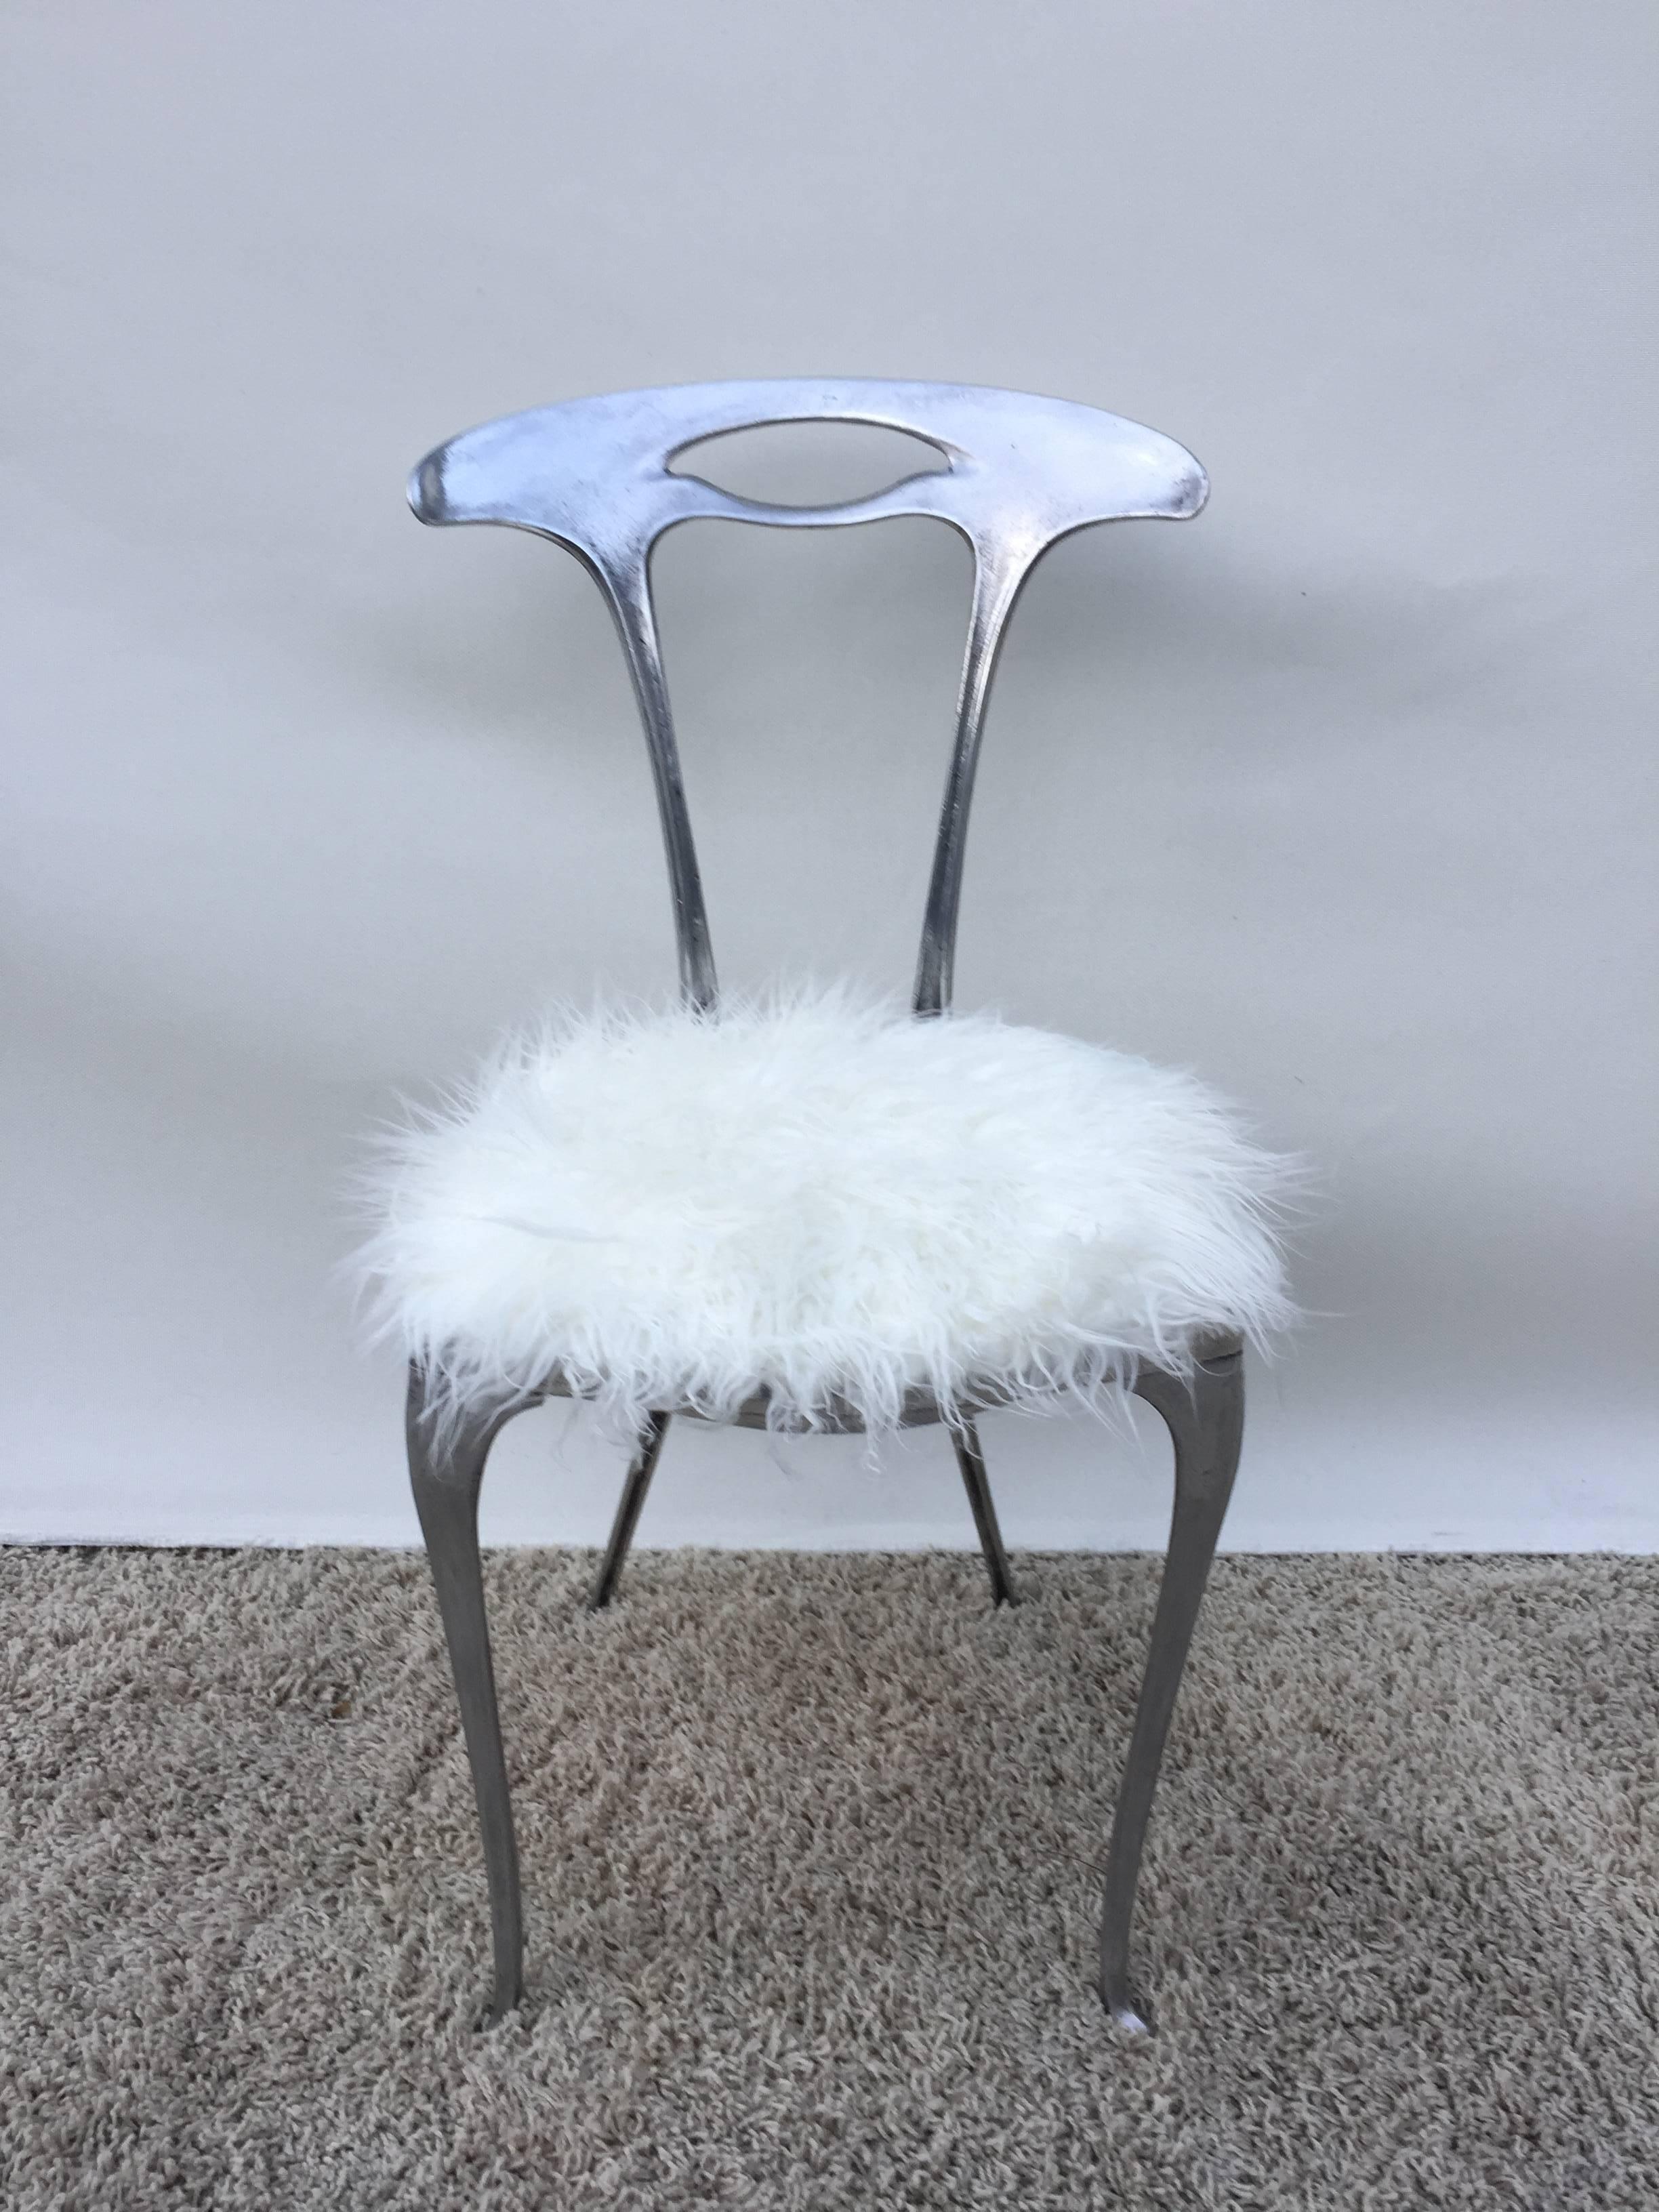 Arthur court aluminum free form petite chair with white faux fur upholstered cushion. Sleek and sophisticated design.